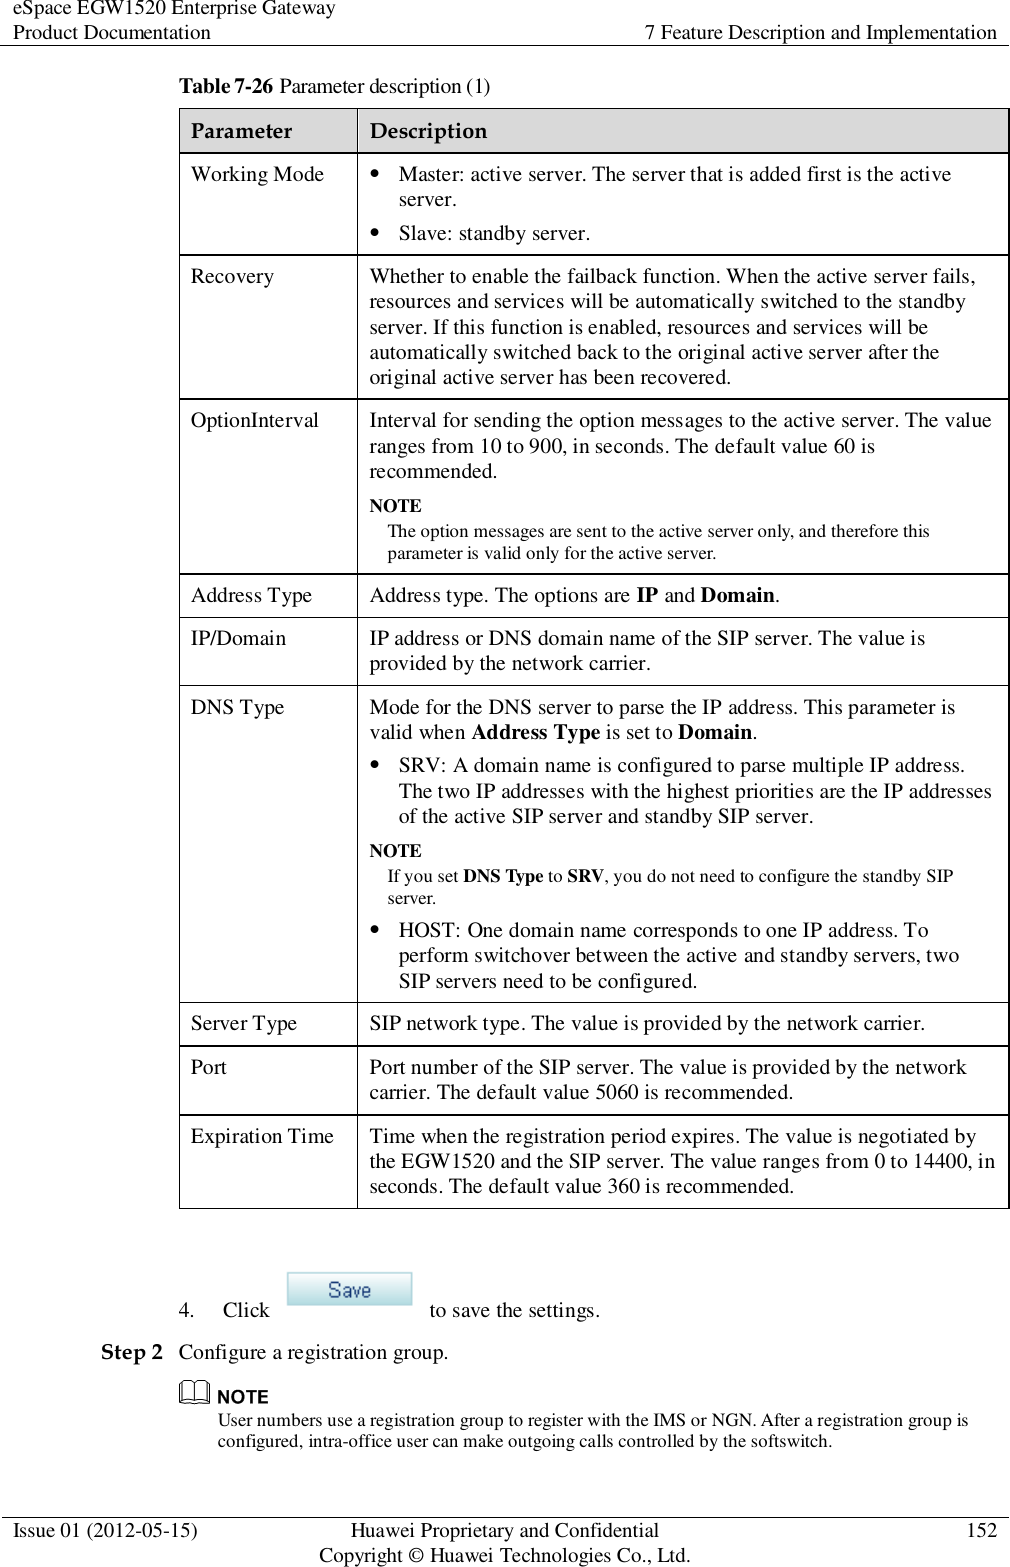 eSpace EGW1520 Enterprise Gateway Product Documentation 7 Feature Description and Implementation  Issue 01 (2012-05-15) Huawei Proprietary and Confidential                                     Copyright © Huawei Technologies Co., Ltd. 152  Table 7-26 Parameter description (1) Parameter Description Working Mode  Master: active server. The server that is added first is the active server.  Slave: standby server. Recovery Whether to enable the failback function. When the active server fails, resources and services will be automatically switched to the standby server. If this function is enabled, resources and services will be automatically switched back to the original active server after the original active server has been recovered. OptionInterval Interval for sending the option messages to the active server. The value ranges from 10 to 900, in seconds. The default value 60 is recommended. NOTE The option messages are sent to the active server only, and therefore this parameter is valid only for the active server. Address Type Address type. The options are IP and Domain. IP/Domain IP address or DNS domain name of the SIP server. The value is provided by the network carrier. DNS Type Mode for the DNS server to parse the IP address. This parameter is valid when Address Type is set to Domain.  SRV: A domain name is configured to parse multiple IP address. The two IP addresses with the highest priorities are the IP addresses of the active SIP server and standby SIP server.   NOTE If you set DNS Type to SRV, you do not need to configure the standby SIP server.  HOST: One domain name corresponds to one IP address. To perform switchover between the active and standby servers, two SIP servers need to be configured. Server Type SIP network type. The value is provided by the network carrier. Port Port number of the SIP server. The value is provided by the network carrier. The default value 5060 is recommended. Expiration Time Time when the registration period expires. The value is negotiated by the EGW1520 and the SIP server. The value ranges from 0 to 14400, in seconds. The default value 360 is recommended.  4. Click    to save the settings. Step 2 Configure a registration group.  User numbers use a registration group to register with the IMS or NGN. After a registration group is configured, intra-office user can make outgoing calls controlled by the softswitch. 